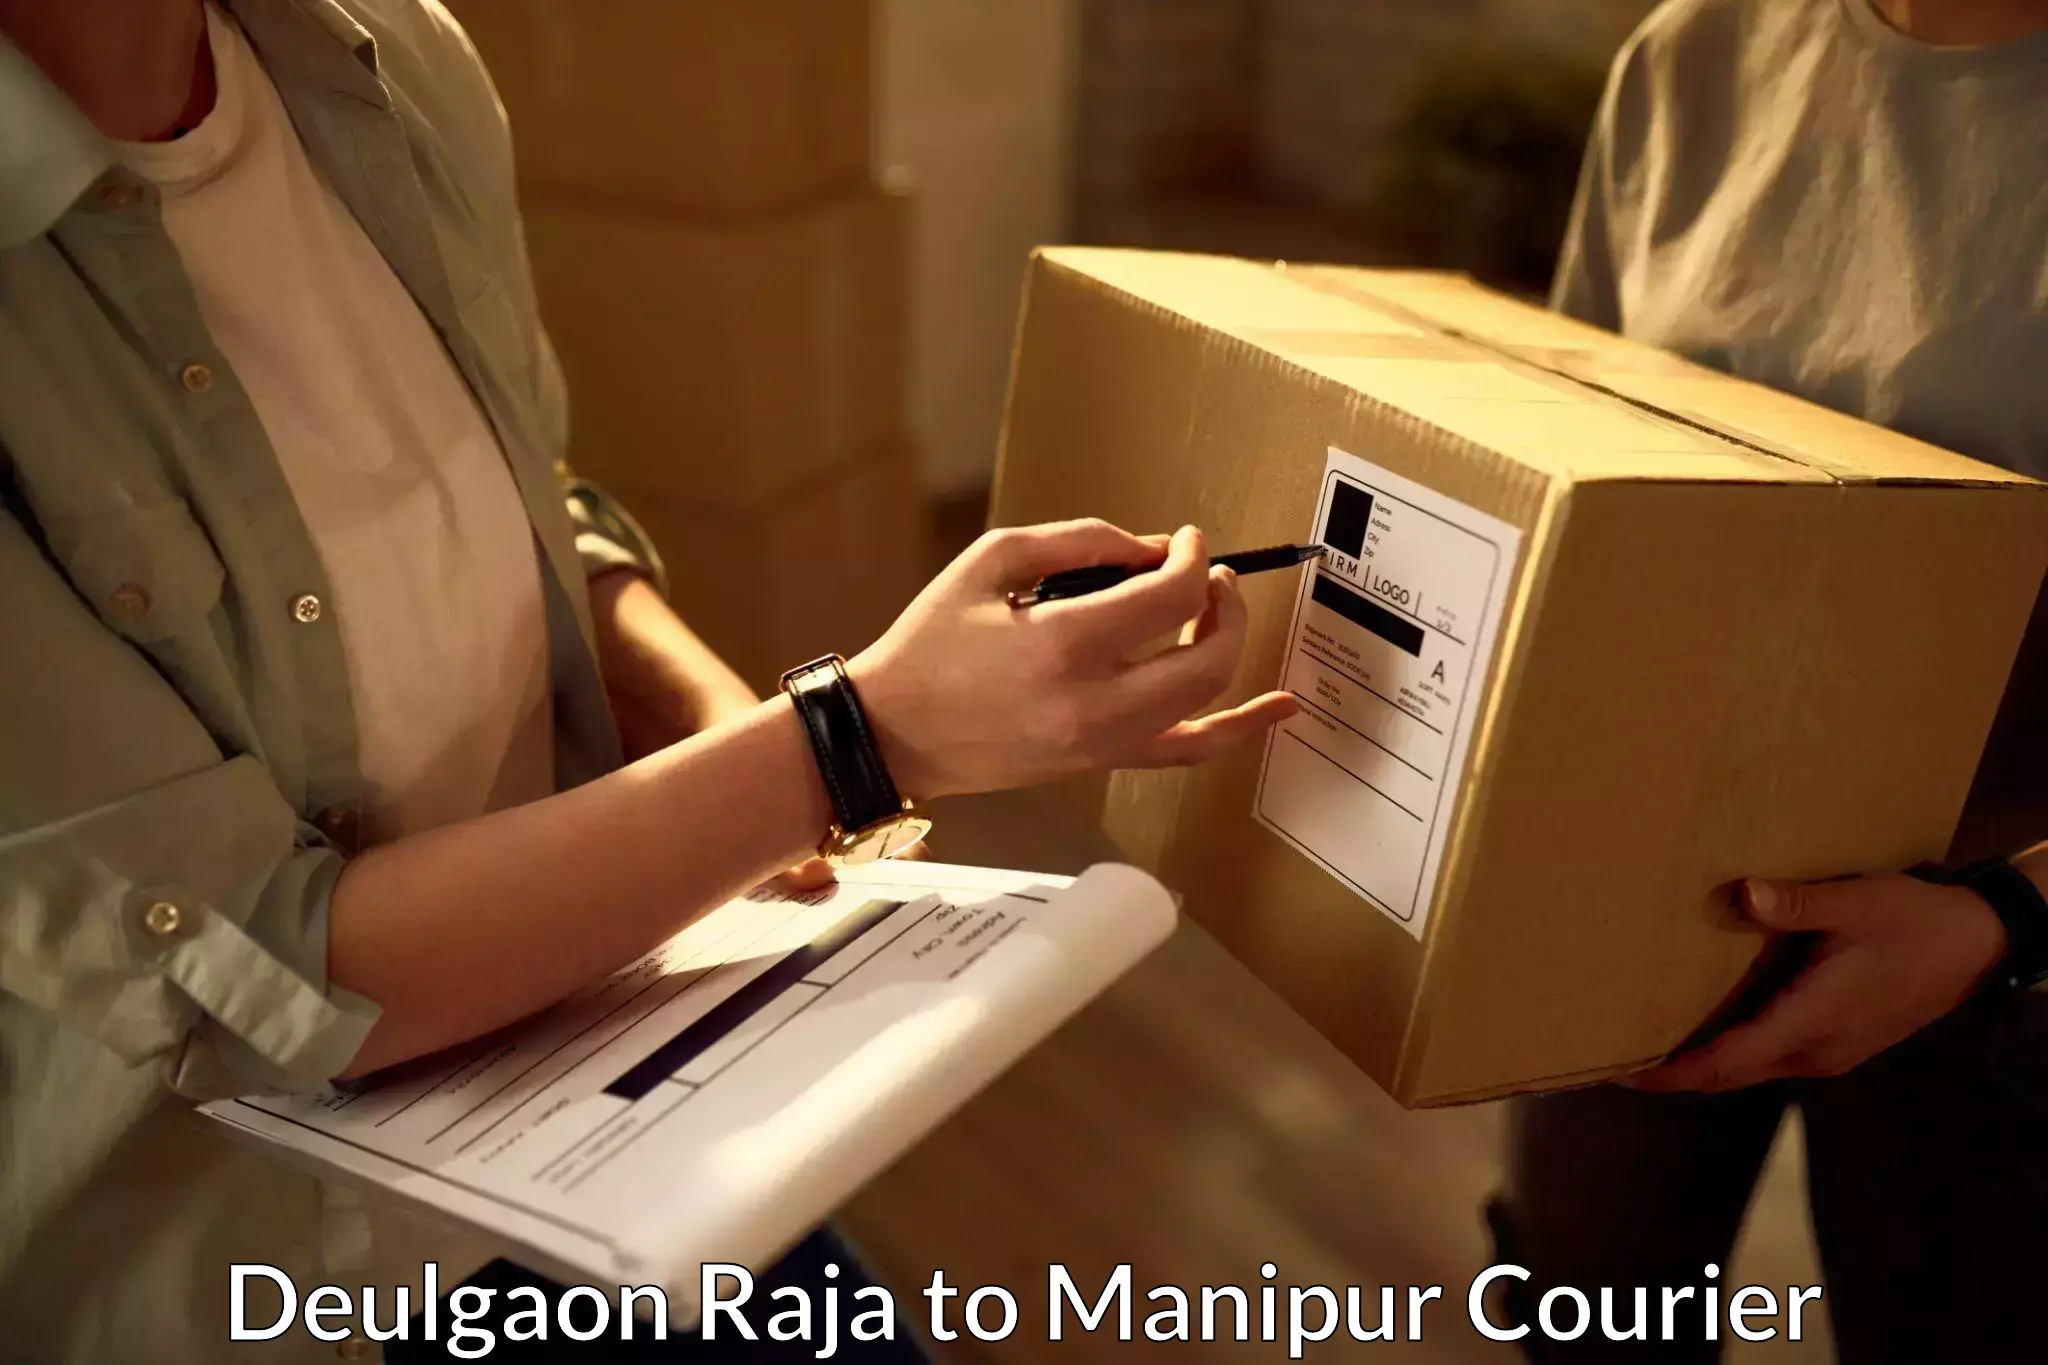 User-friendly delivery service Deulgaon Raja to Kakching